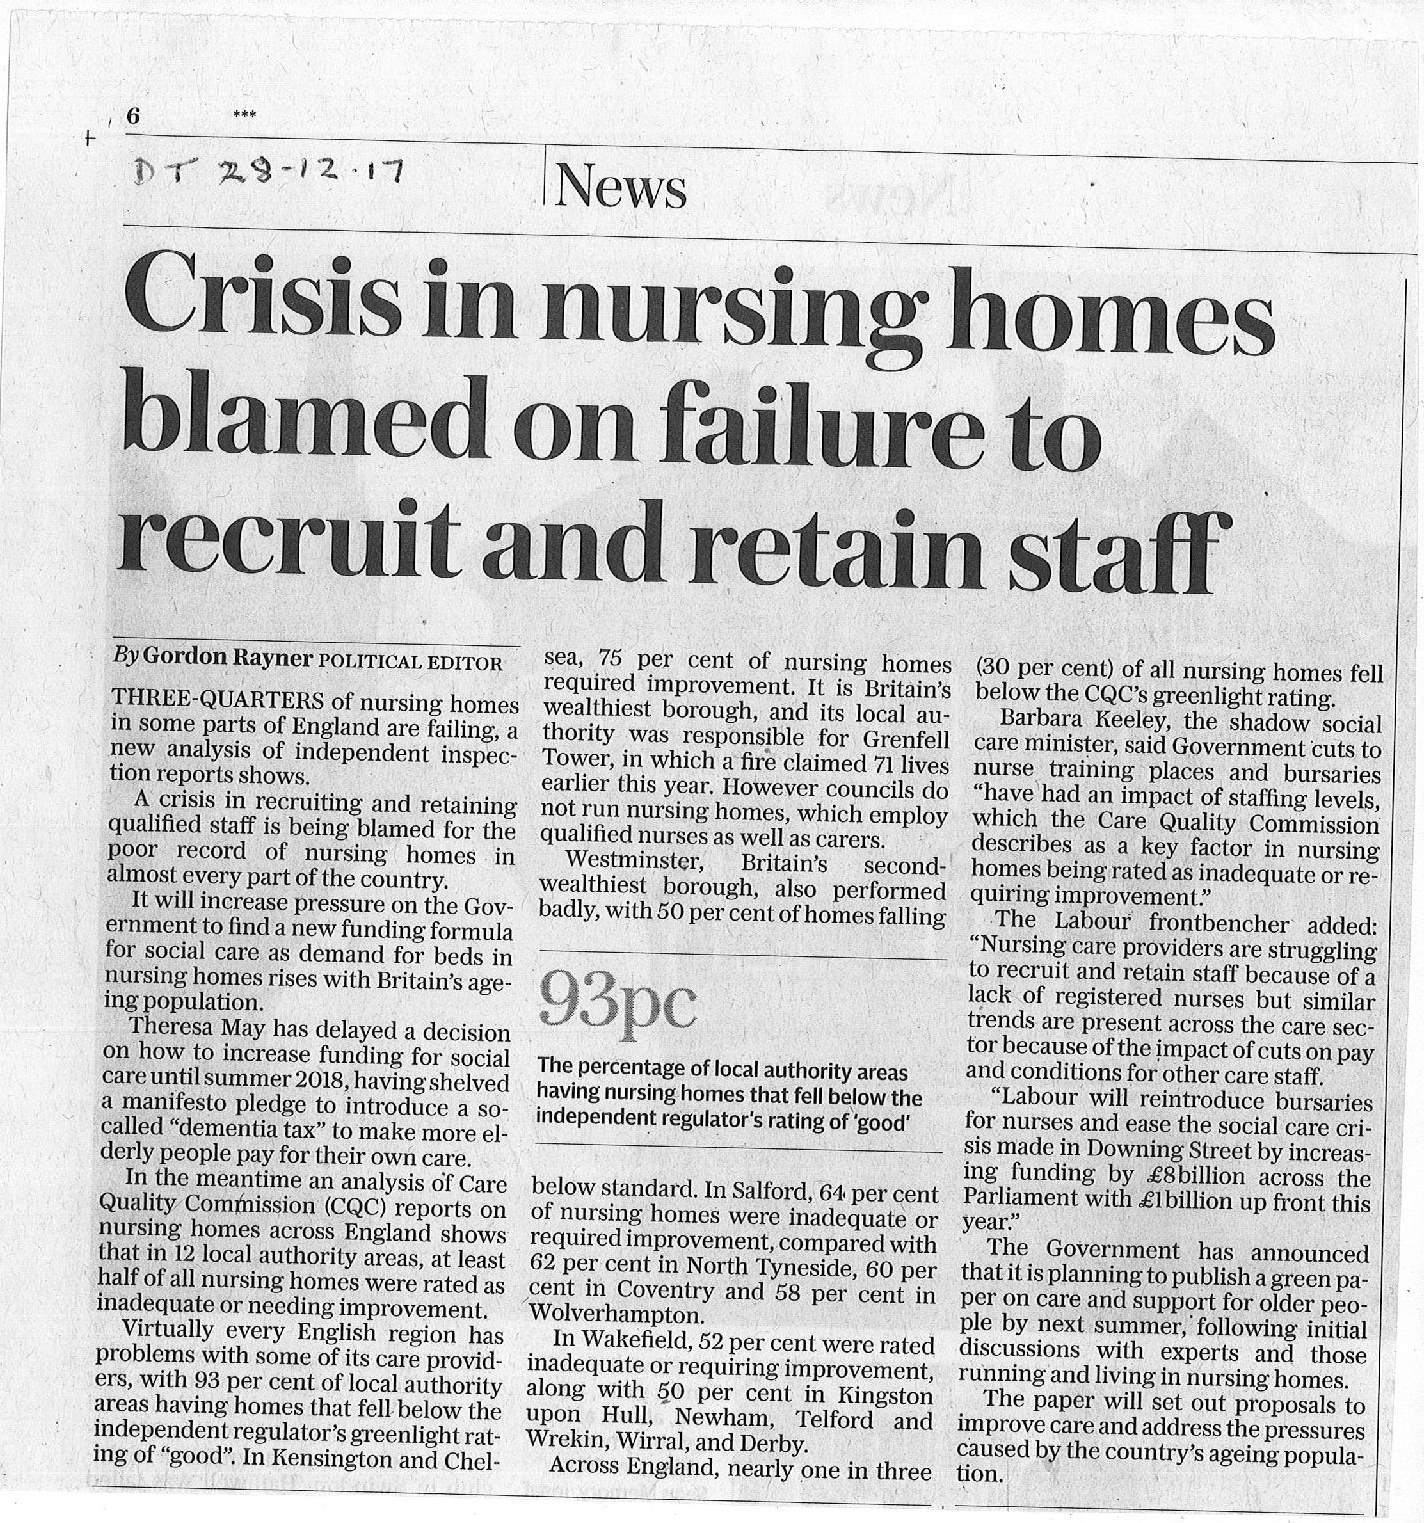 Crisis in nursing homes blamed on failure to recruit and retain staff